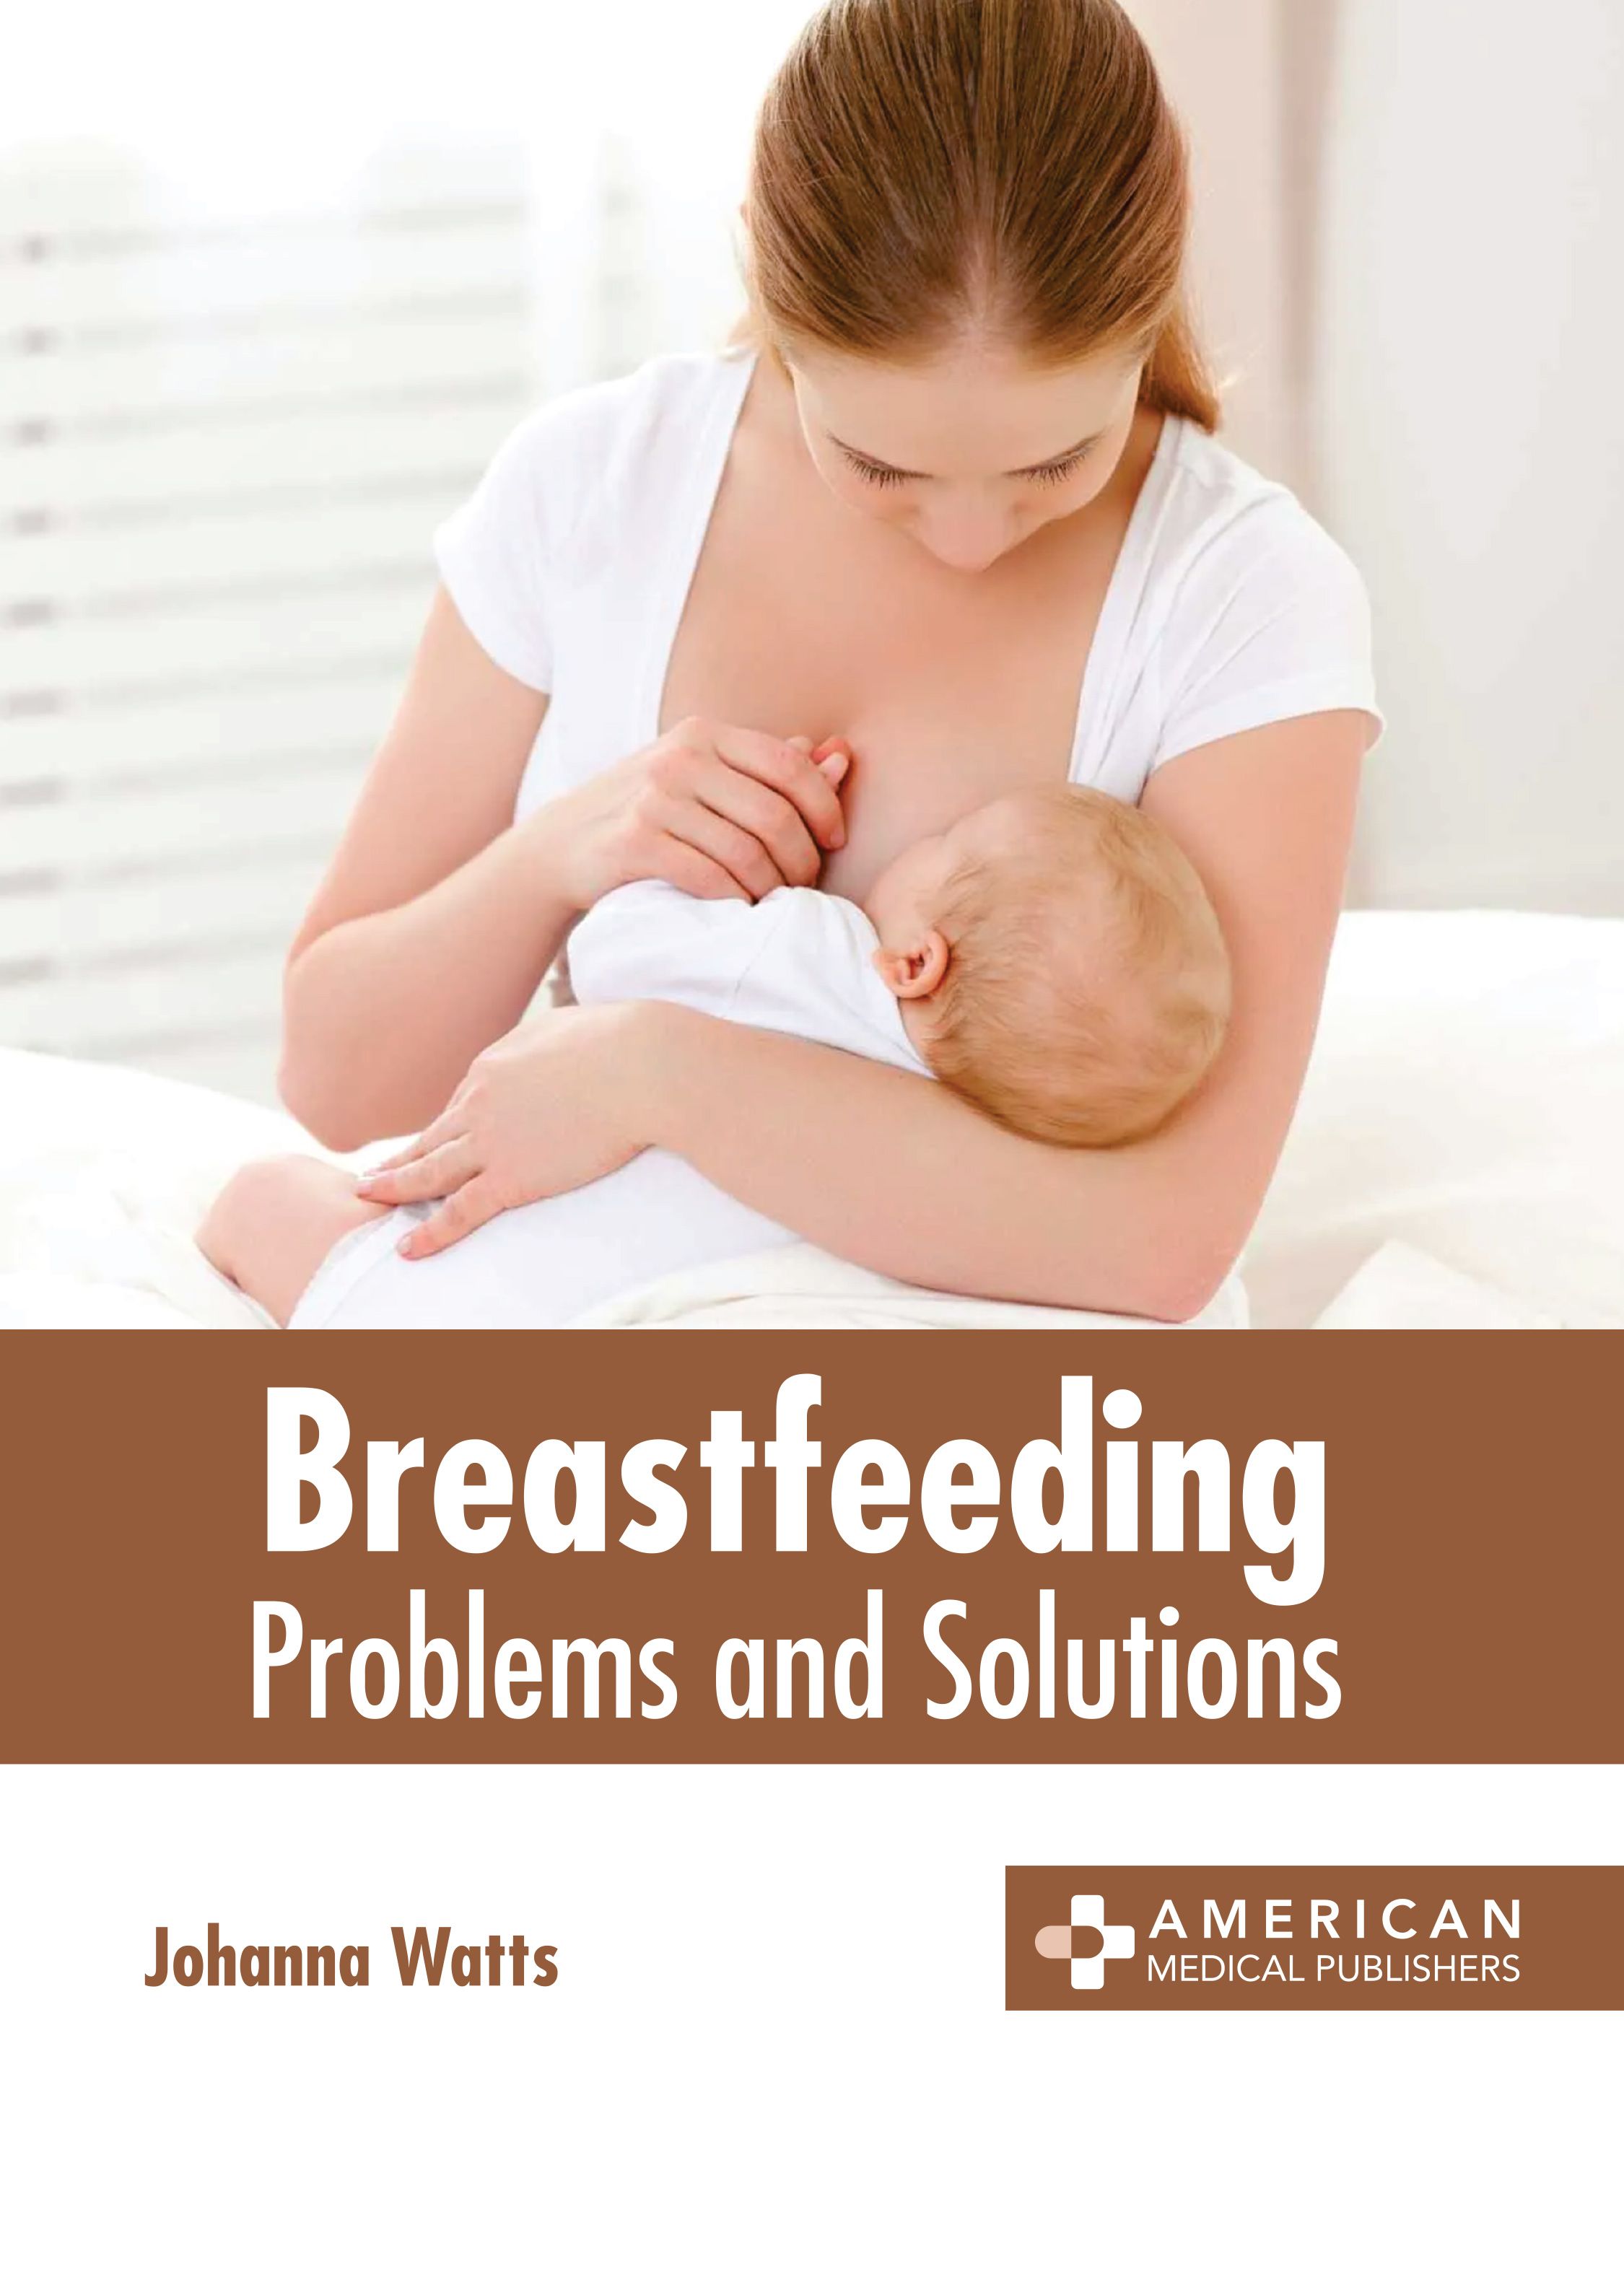 BREASTFEEDING: PROBLEMS AND SOLUTIONS